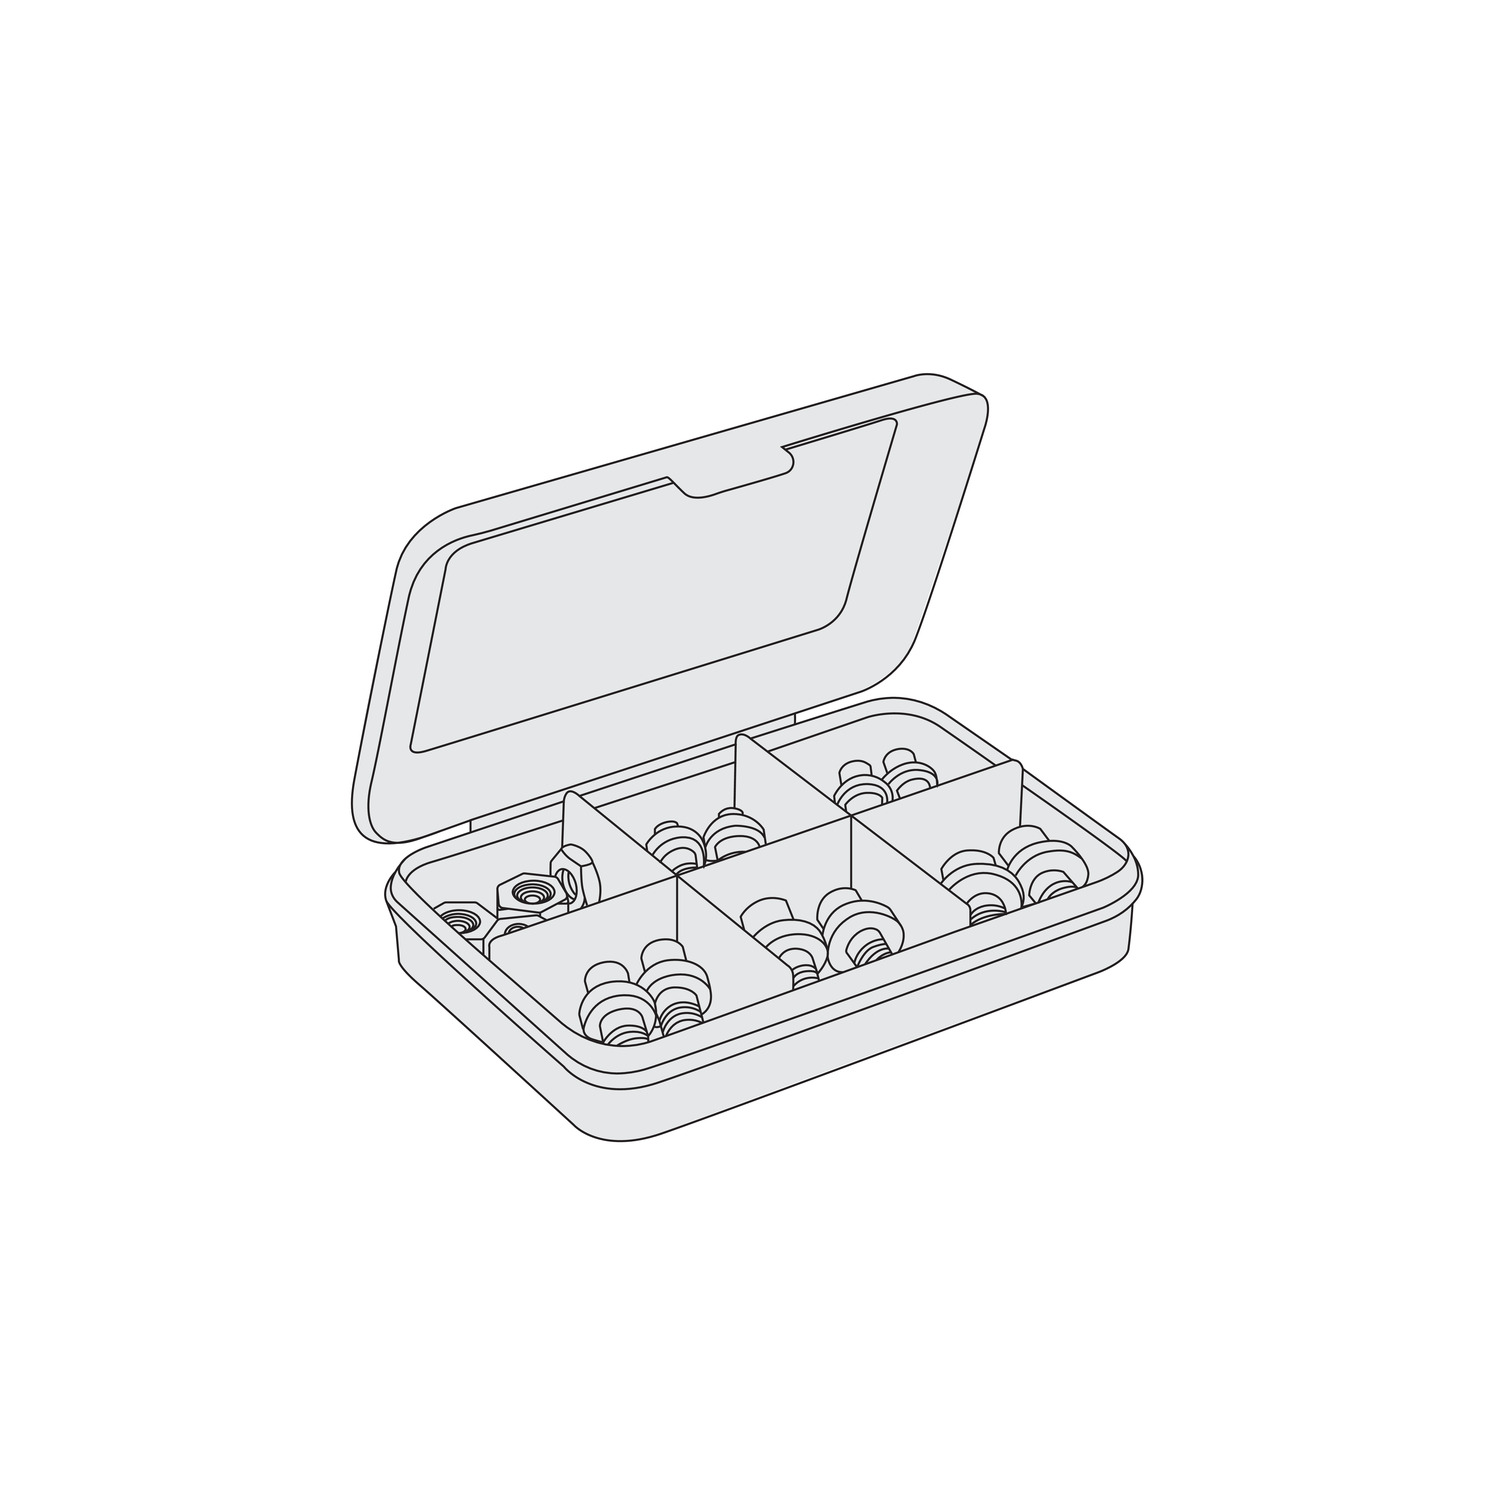 95362 - Replaceable Pin - Assortment